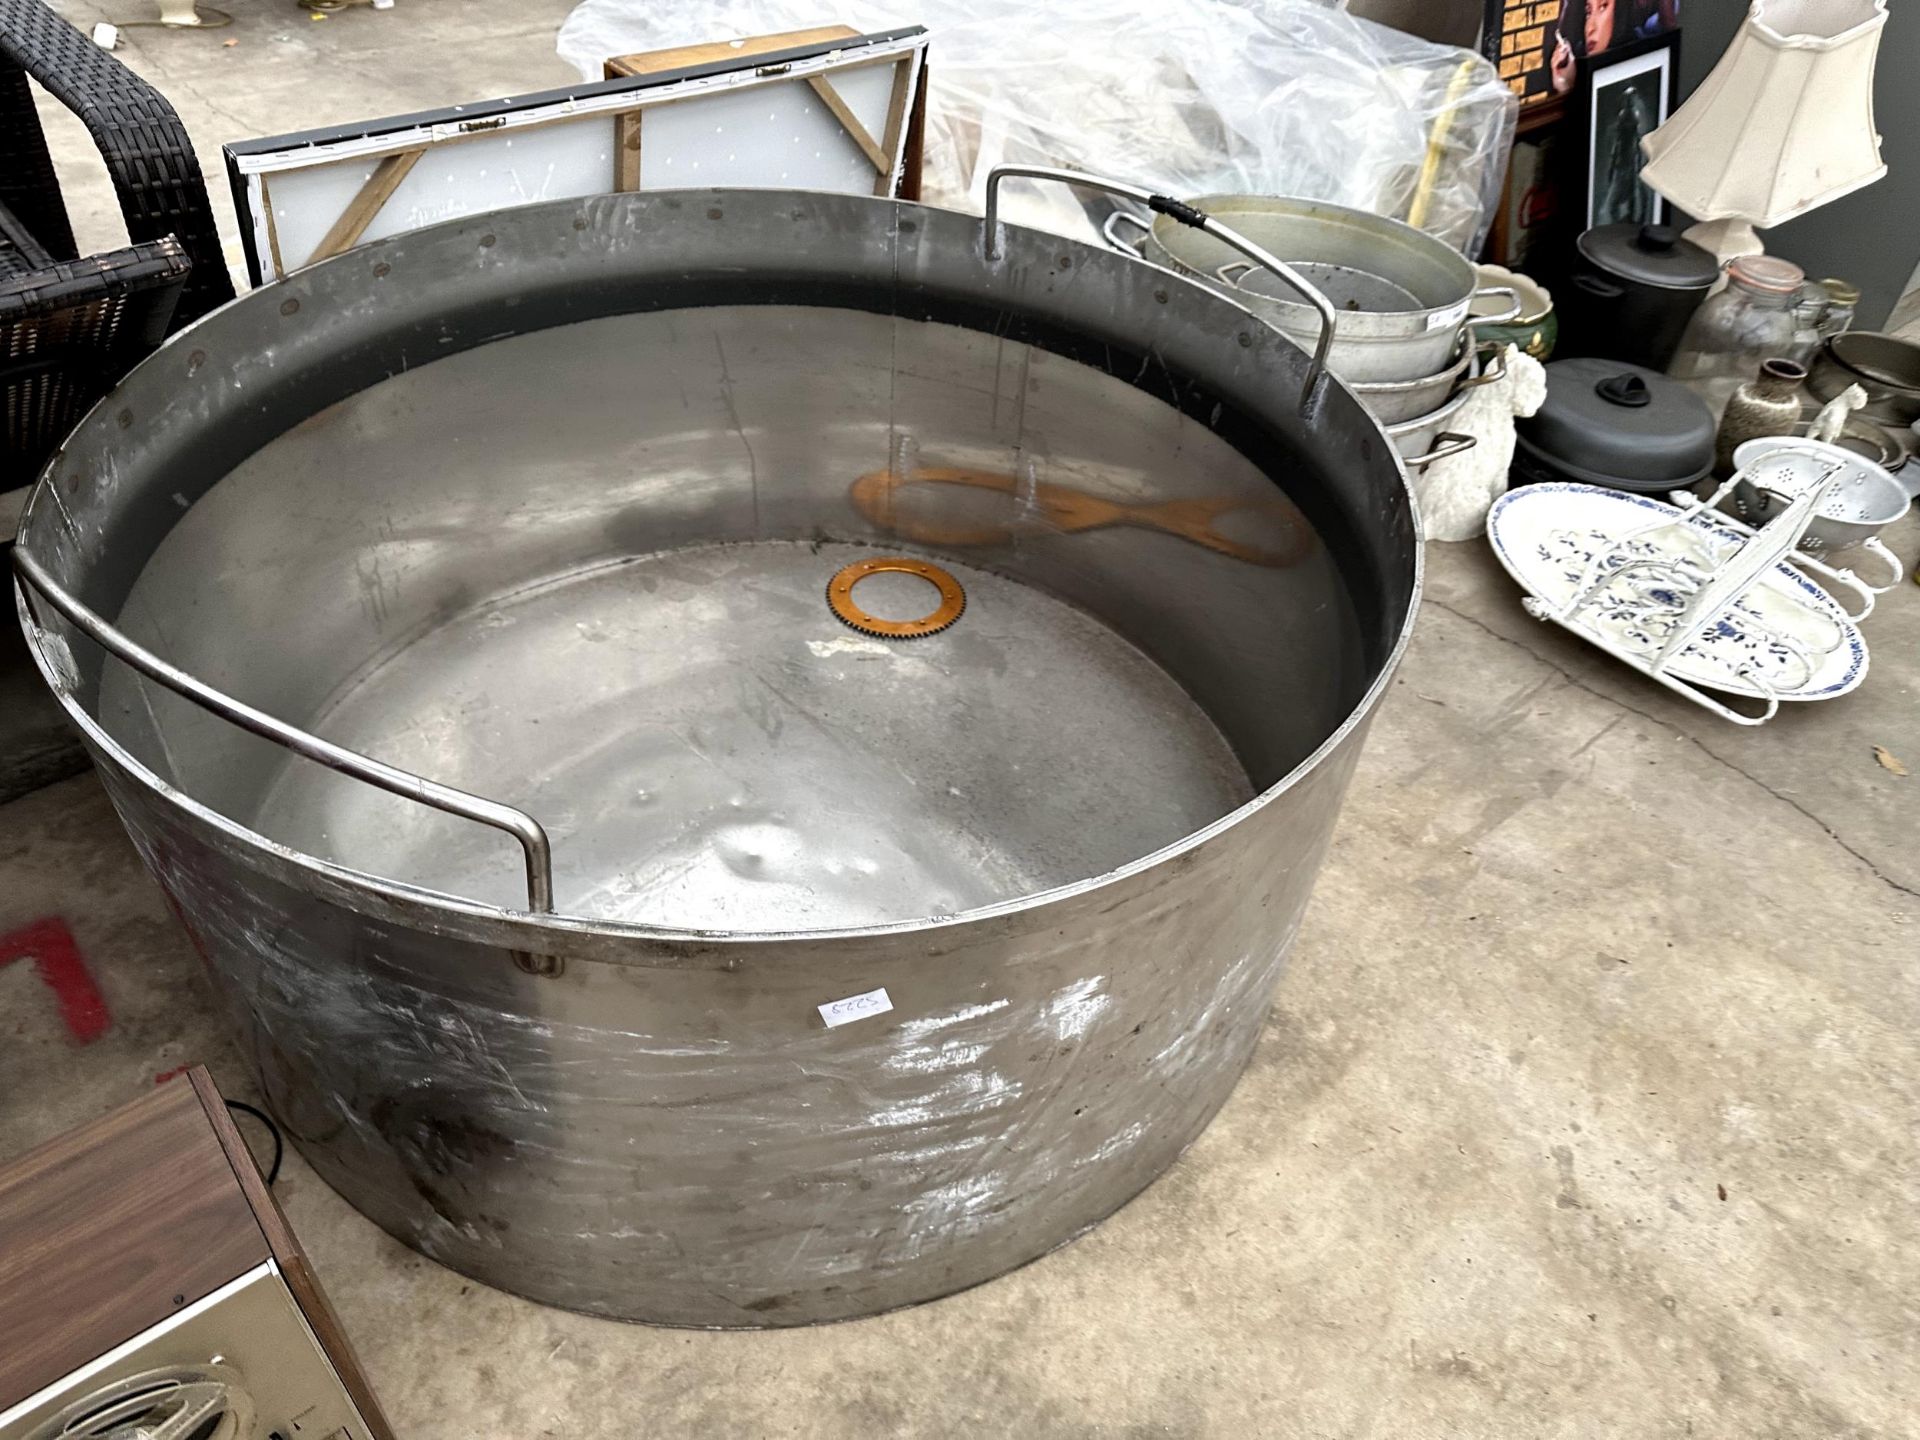 A VERY LARGE STAINLESS STEEL COOKING POT - Image 3 of 3